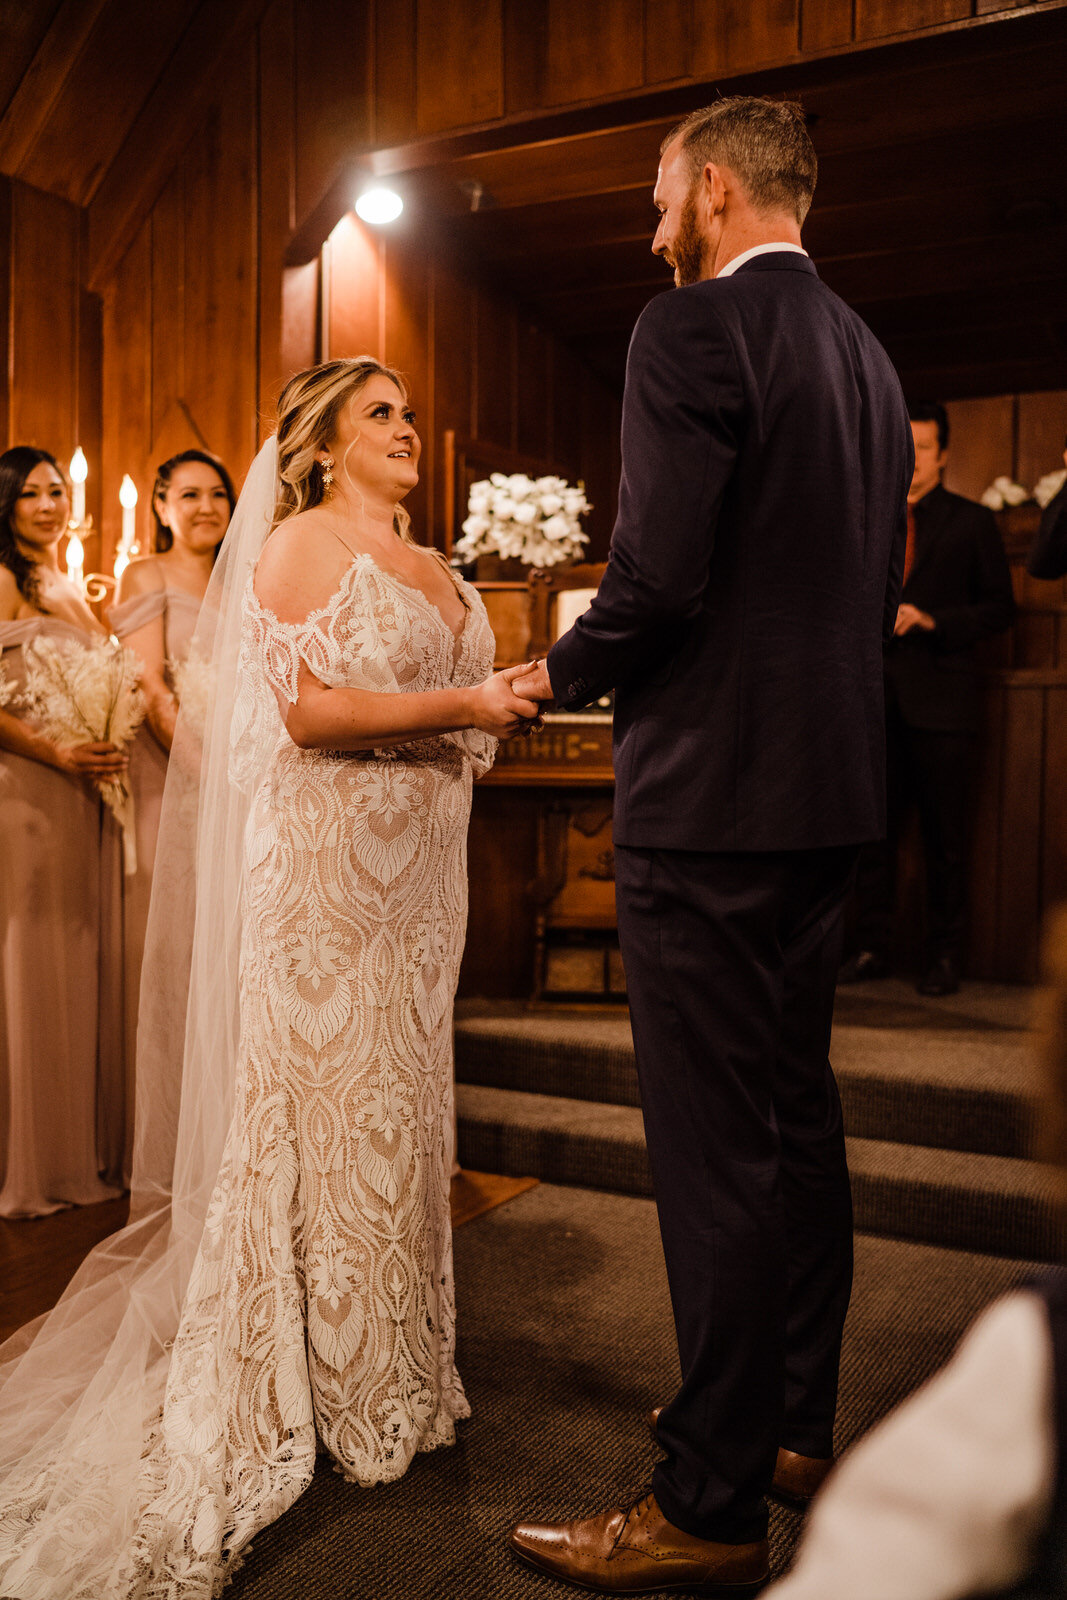 Las-Vegas-Wedding-Little-Church-of-the-West-Bride-and-Groom-Exchanging-Vows.JPG